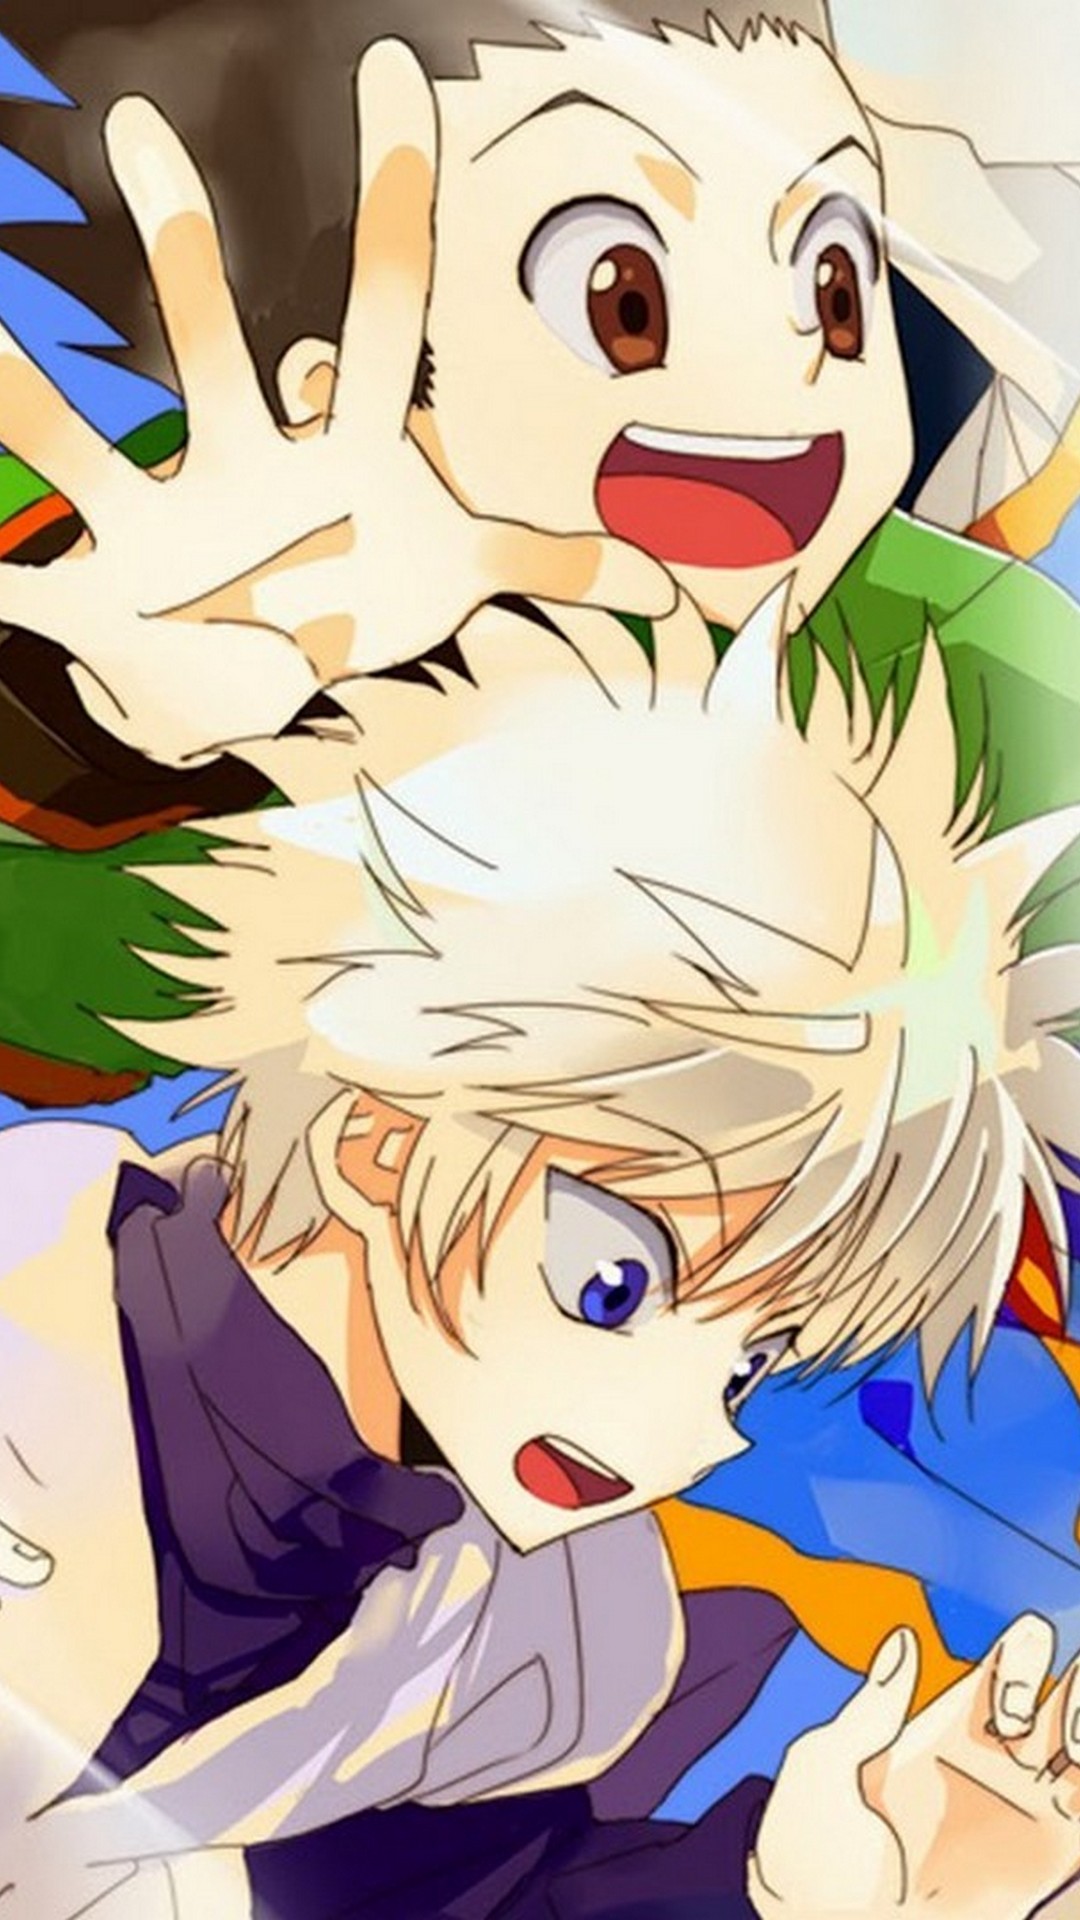 Gon And Killua iPhone X Wallpaper with high-resolution 1080x1920 pixel. You can use this wallpaper for your iPhone 5, 6, 7, 8, X, XS, XR backgrounds, Mobile Screensaver, or iPad Lock Screen